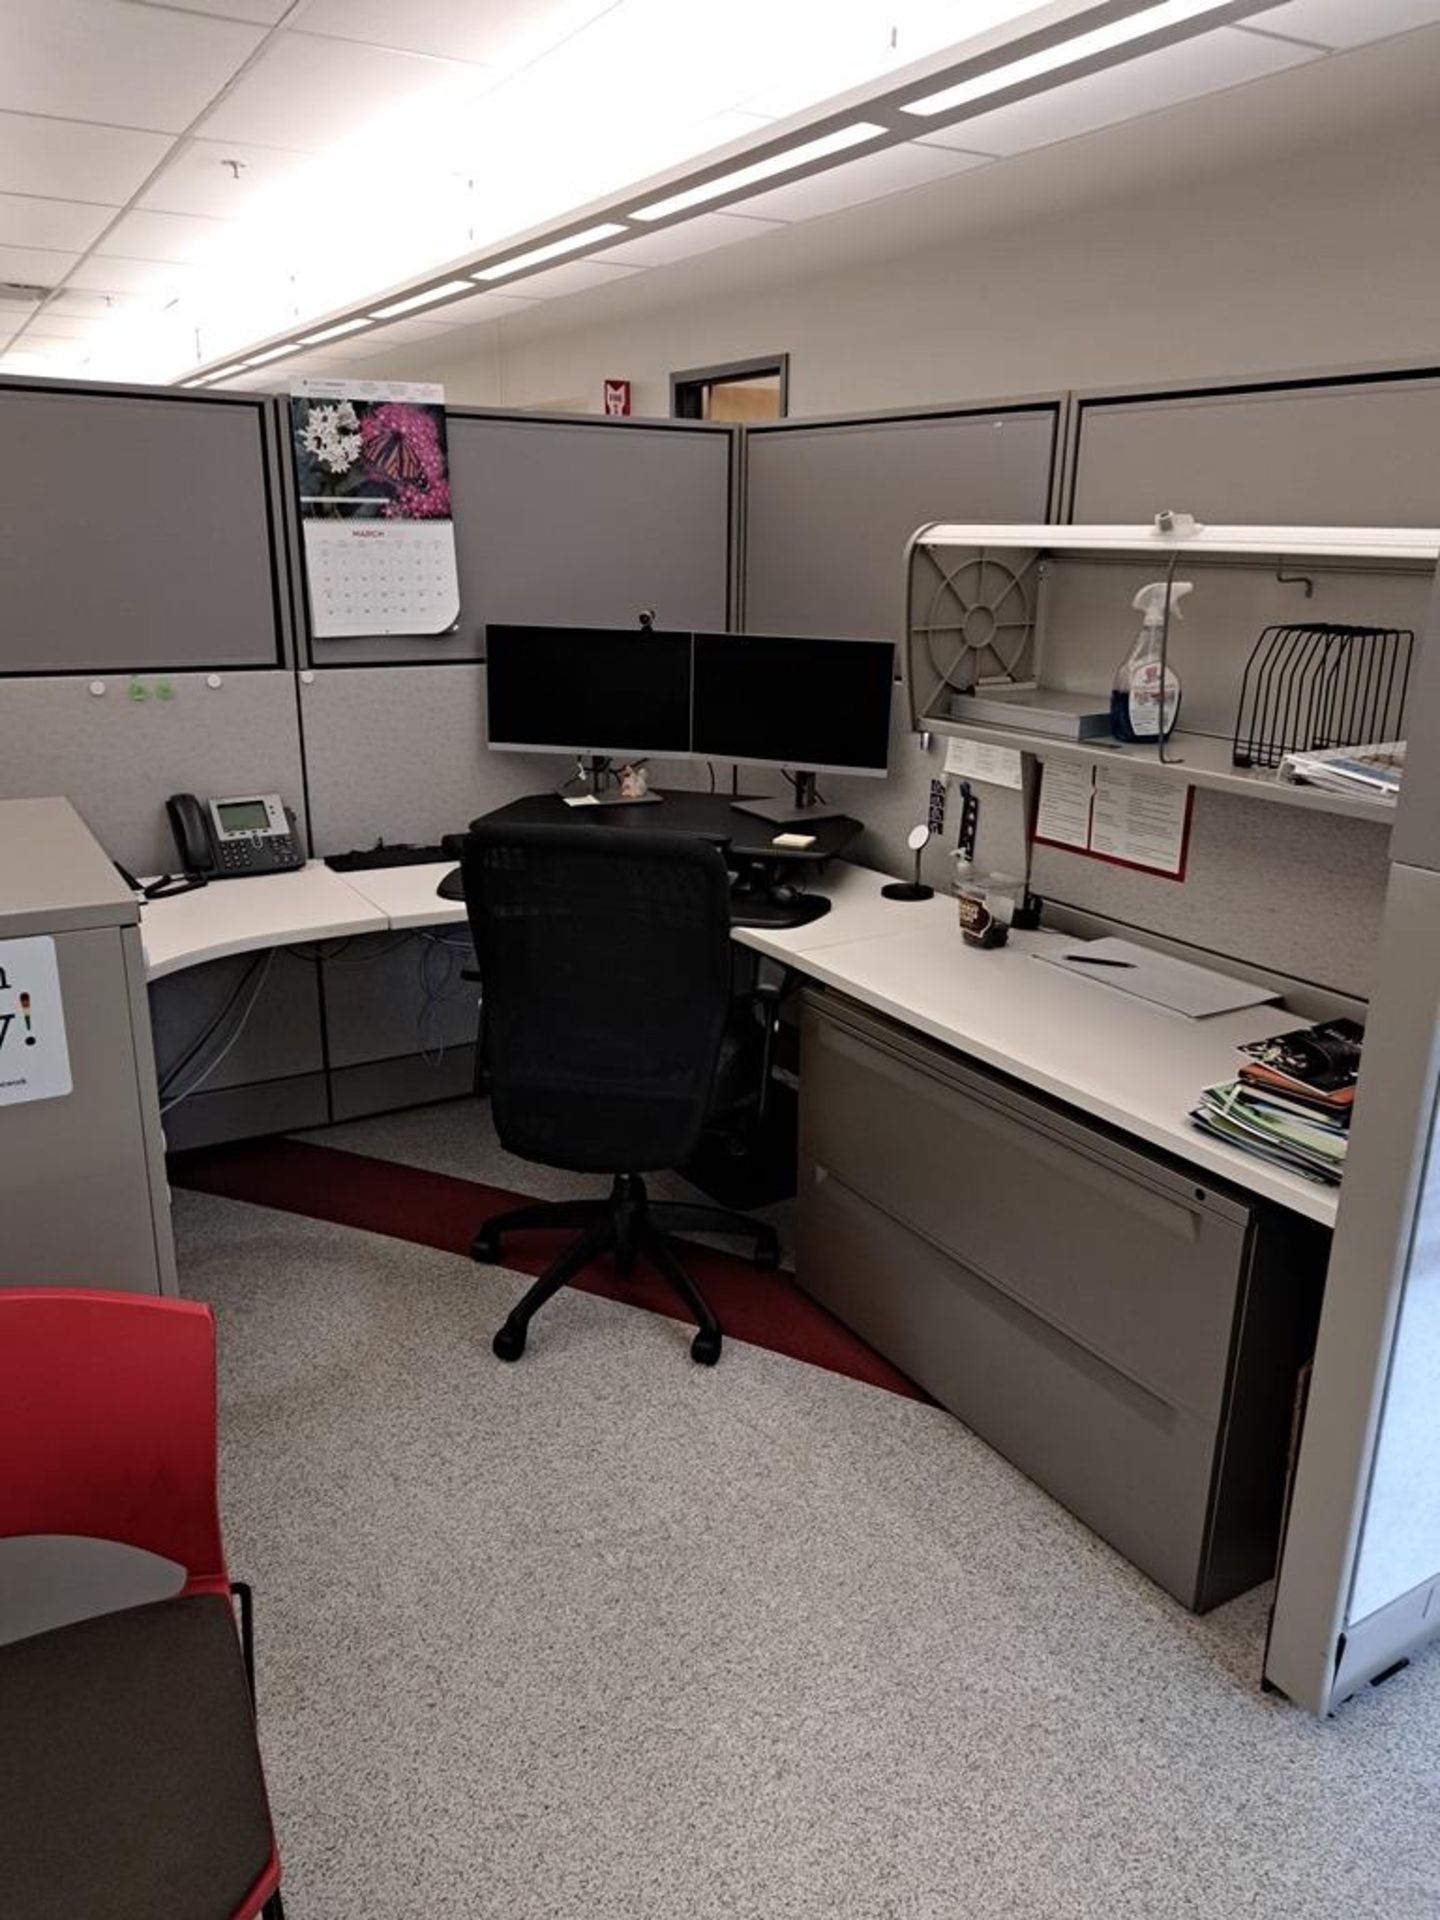 Herman Miller Cubicle Work Stations, 17' W X 50' L, (2) Work Stations per section, (12) Sections, - Image 14 of 25